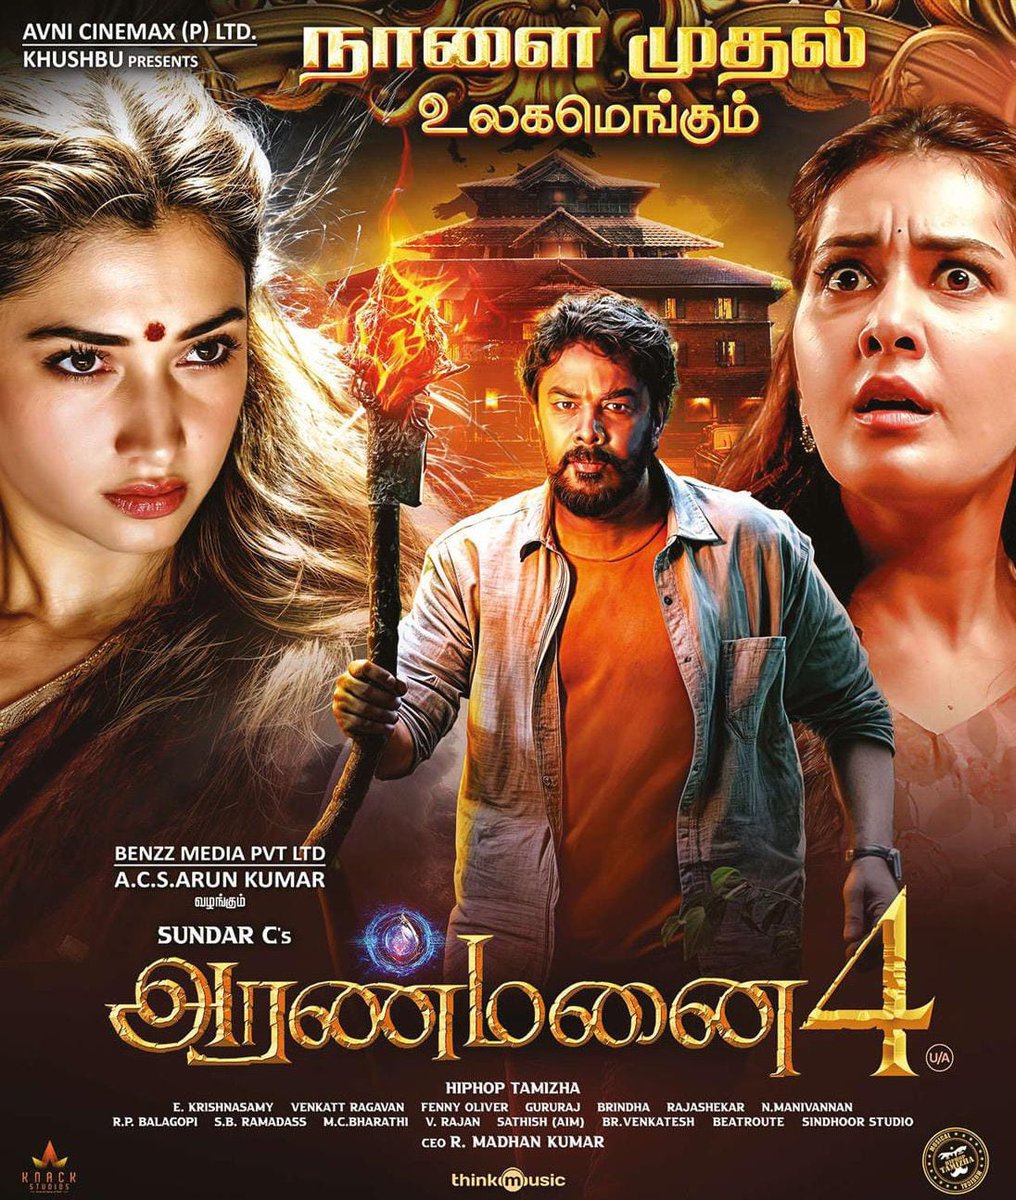 #Aranmanai4 Bookings open now👍🏼 Screen 1 friday to sunday (4shows)